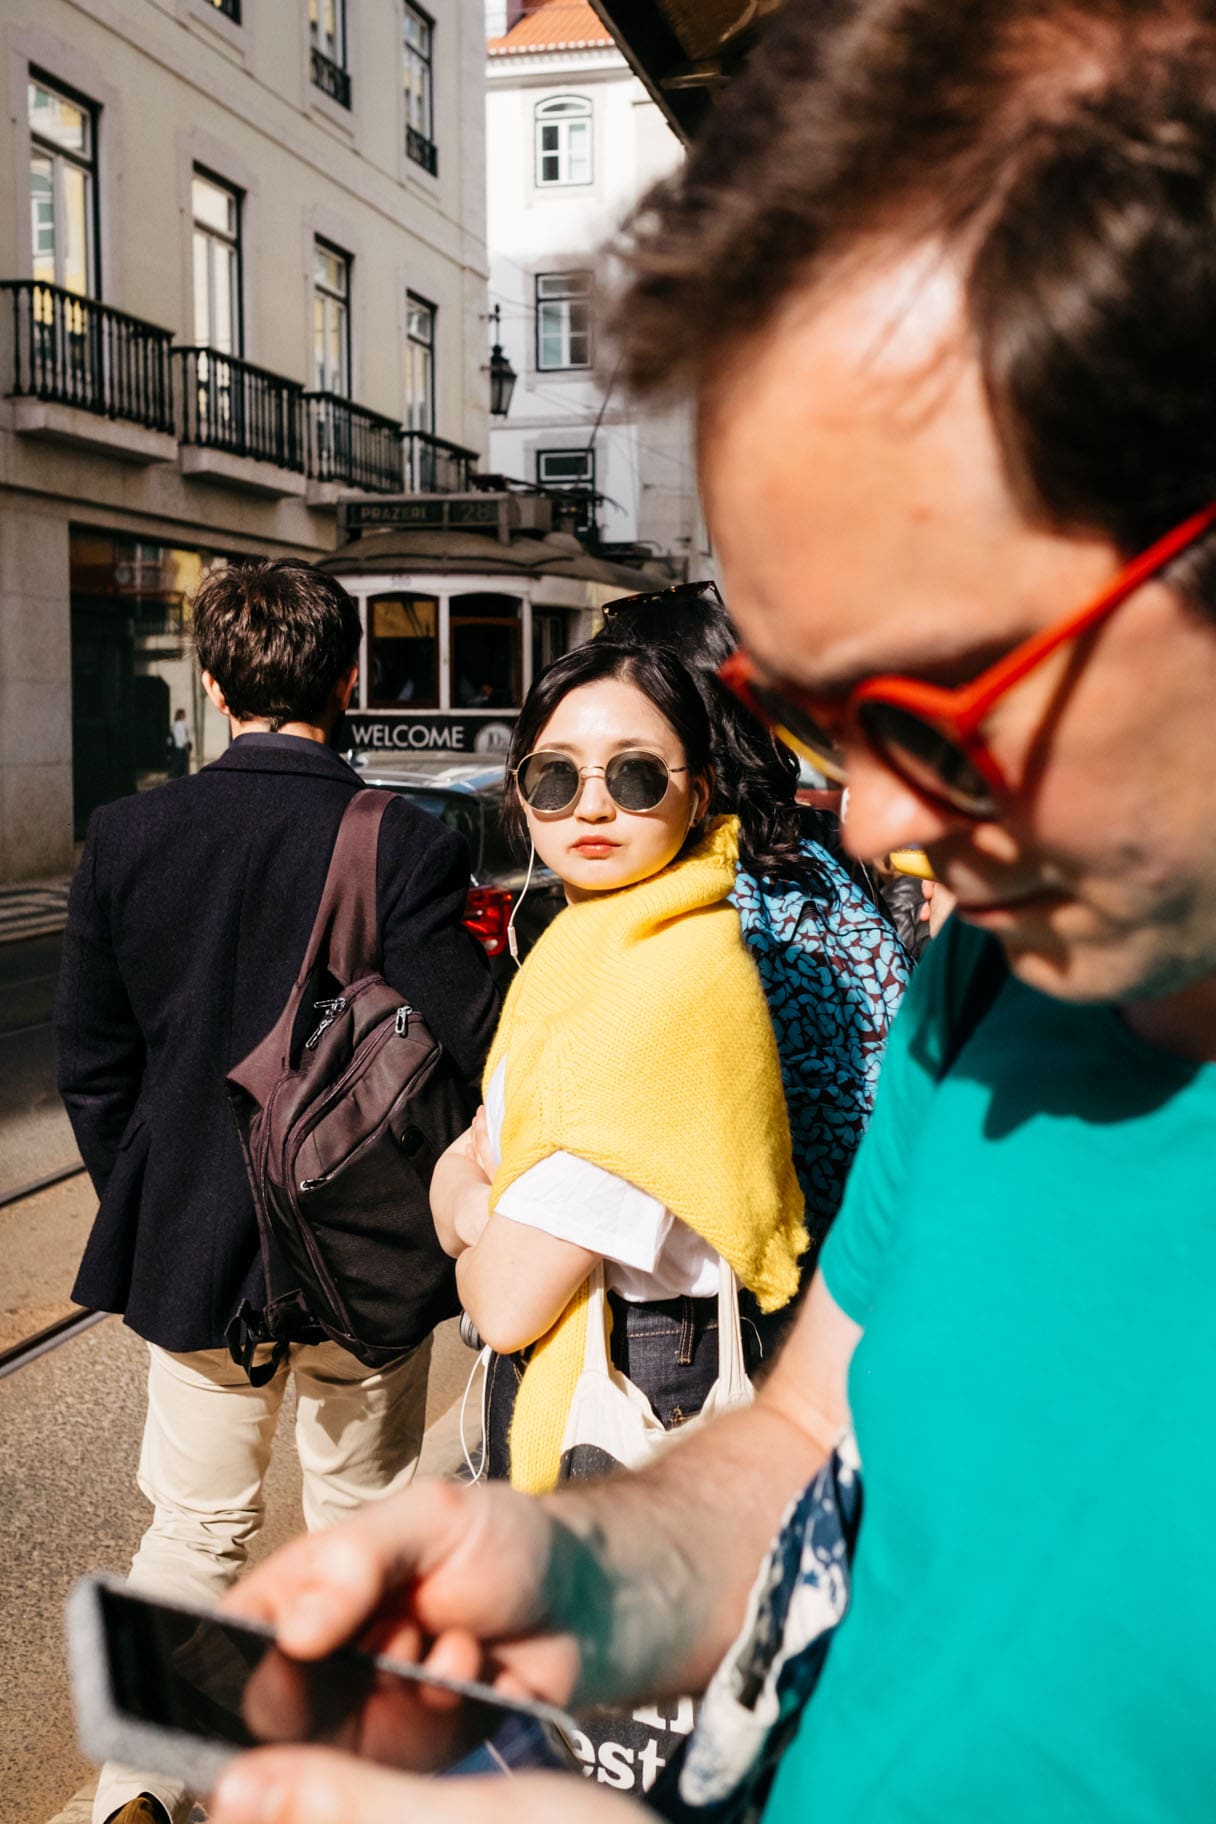 A woman wearing sunglasses and a yellow jumper in Lisbon, candidly captured by photographer Emma Croman